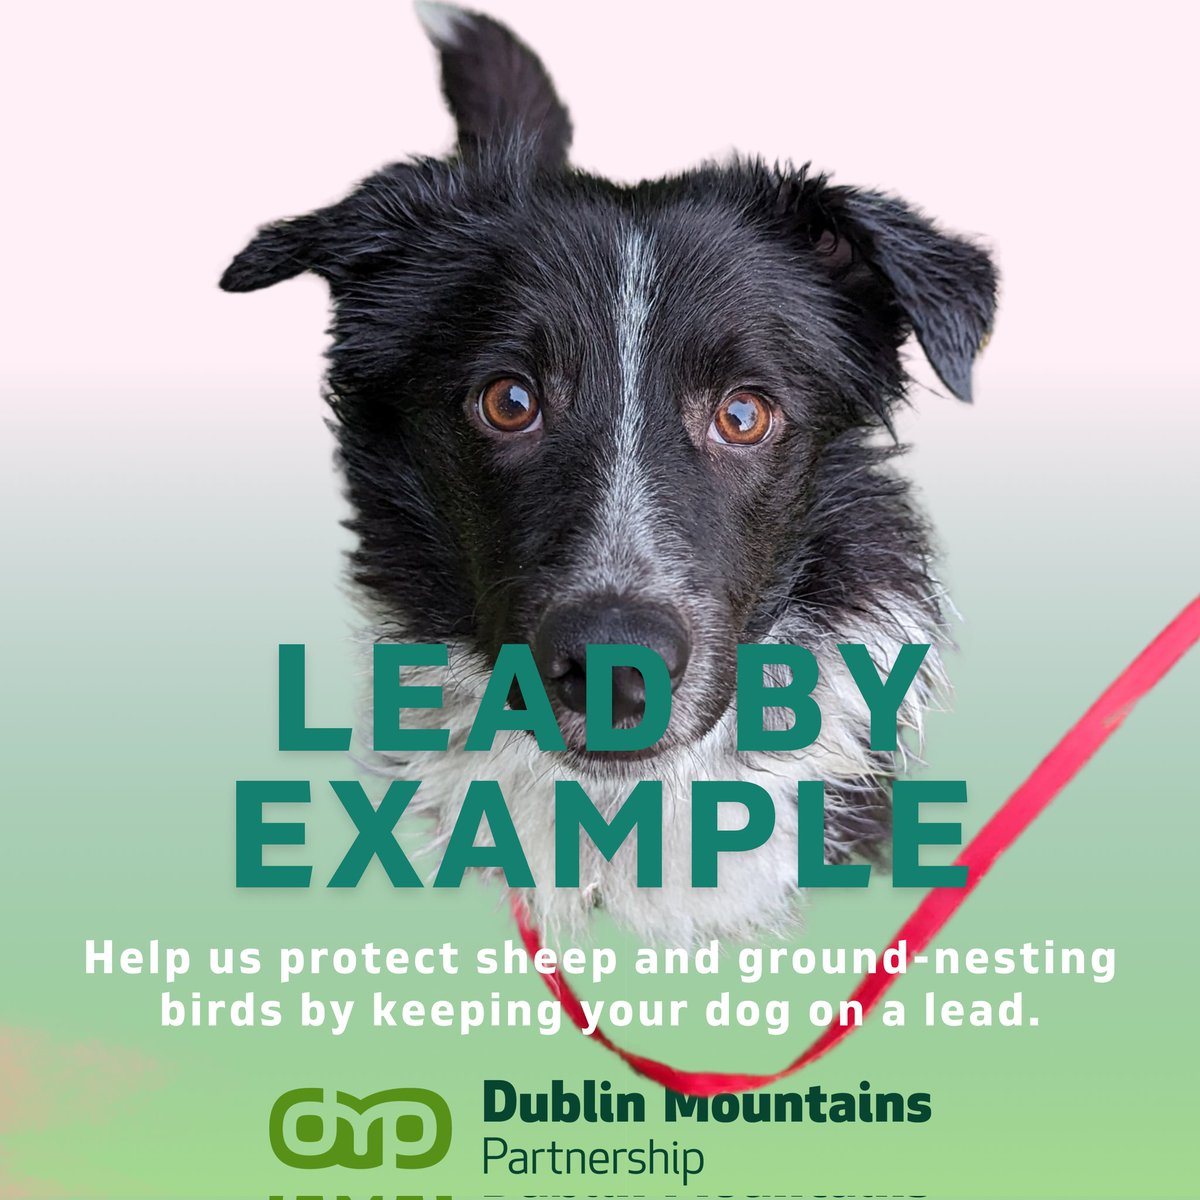 Enjoying the Dublin Mountains means respecting its inhabitants. Help us protect sheep & ground-nesting birds by keeping your dog on a lead. Let's ensure a safe environment for all creatures that call the Dublin Mountains home. #LeadByExample @NPWSIreland @coilltenews